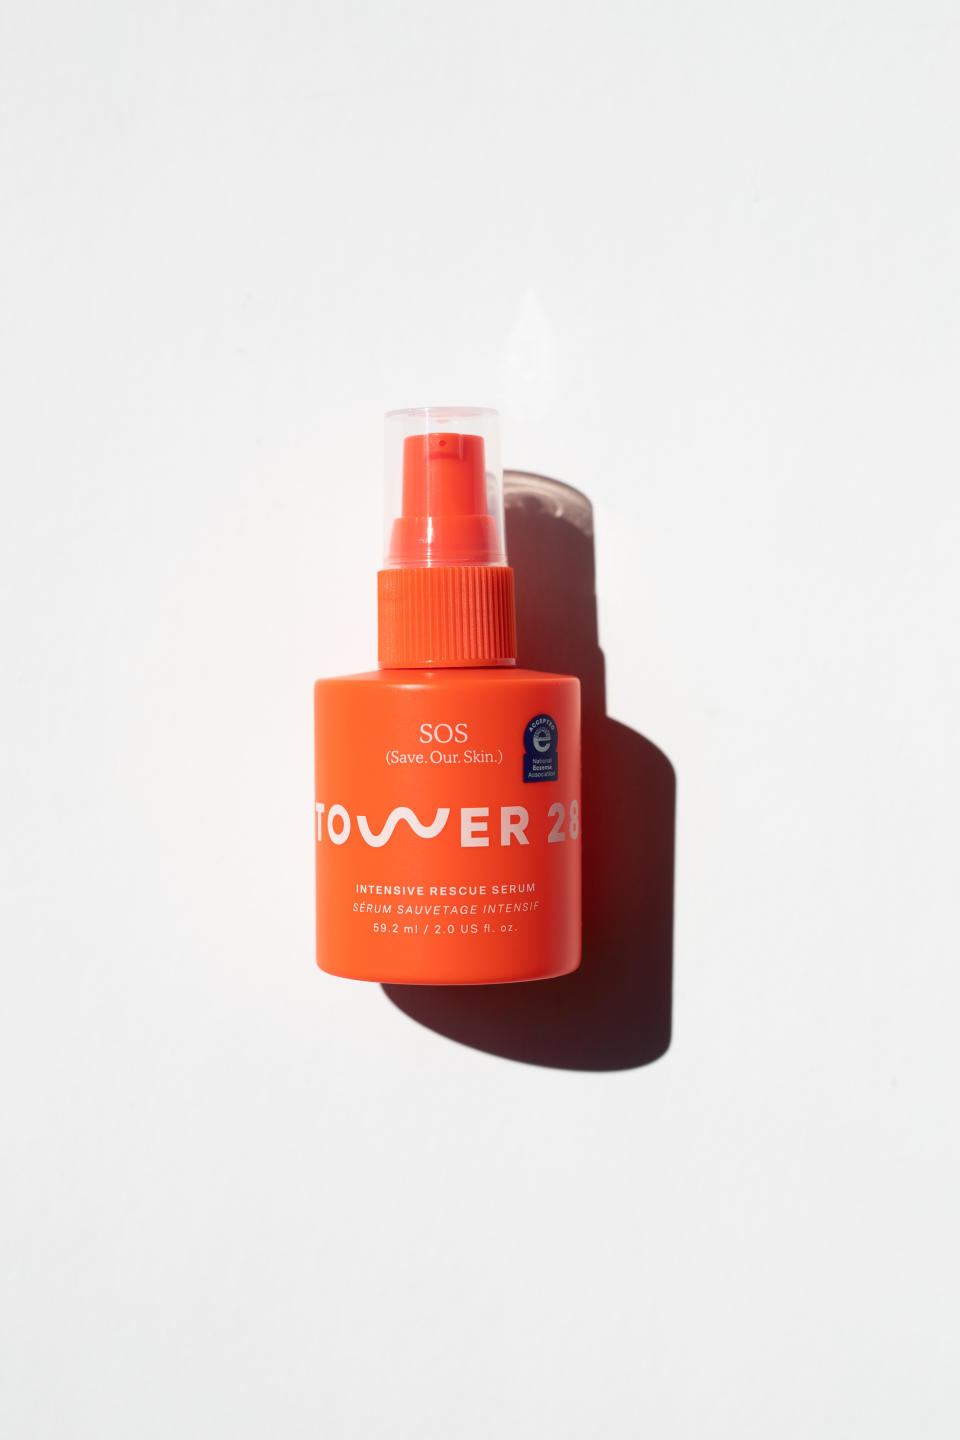 Tower 28 SOS Intensive Rescue Serum - Credit: Courtesy